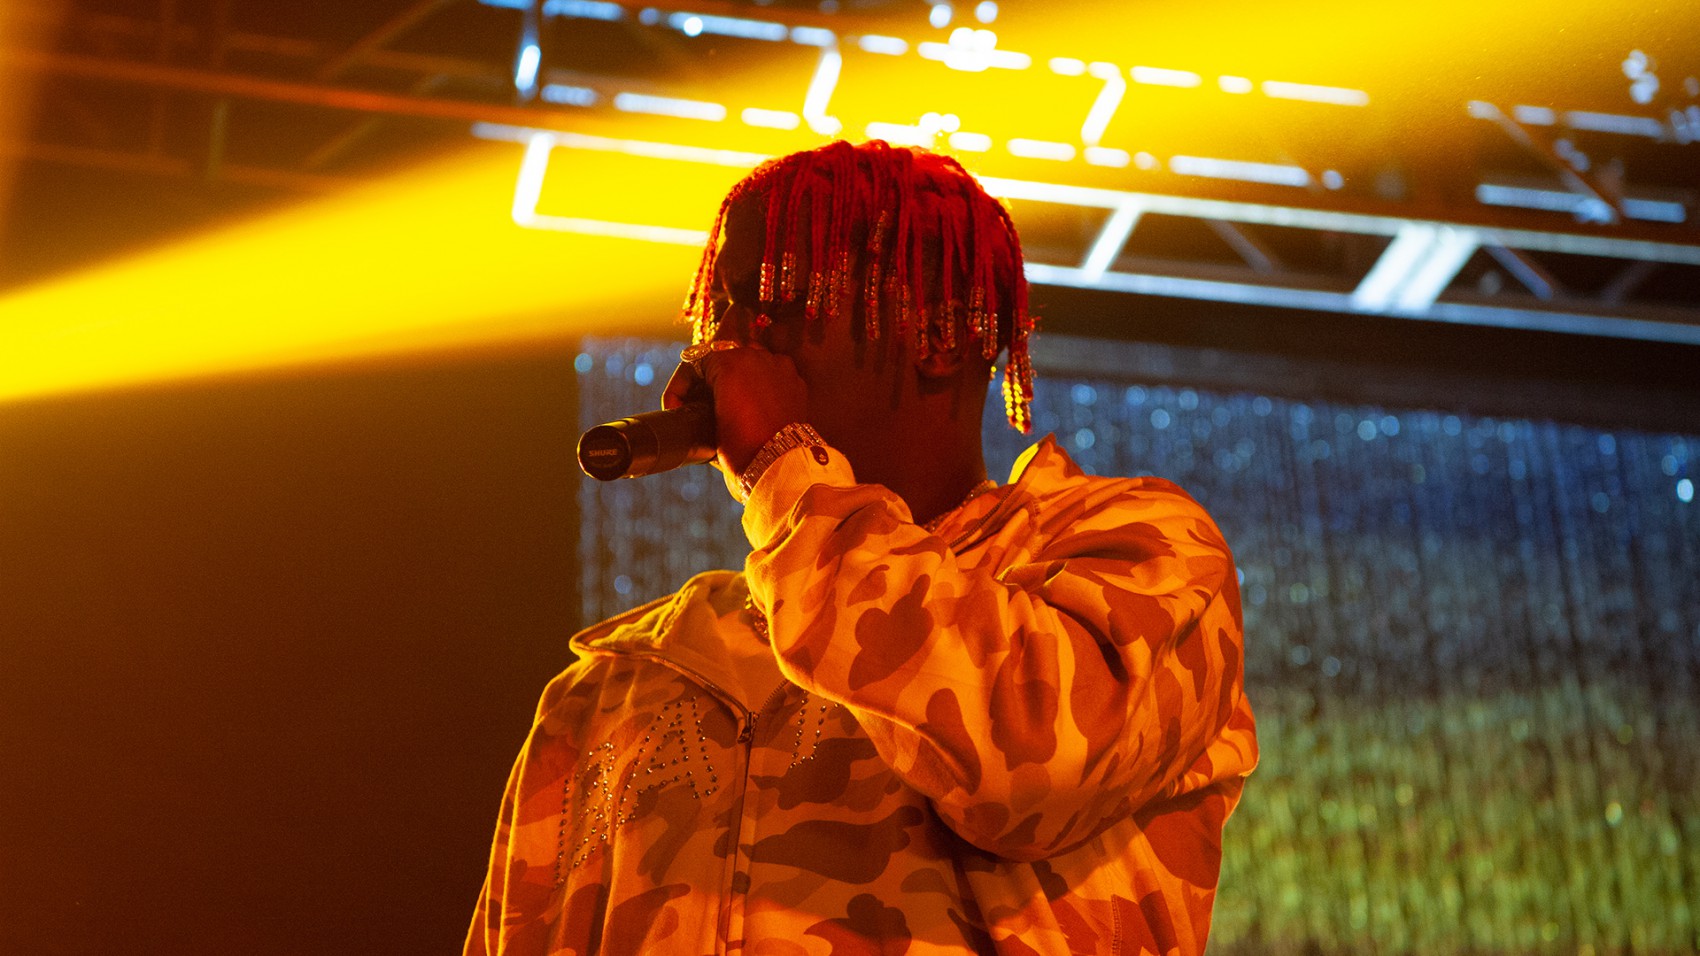 Lil Yachty x Spotify - King of the sea album launch_4